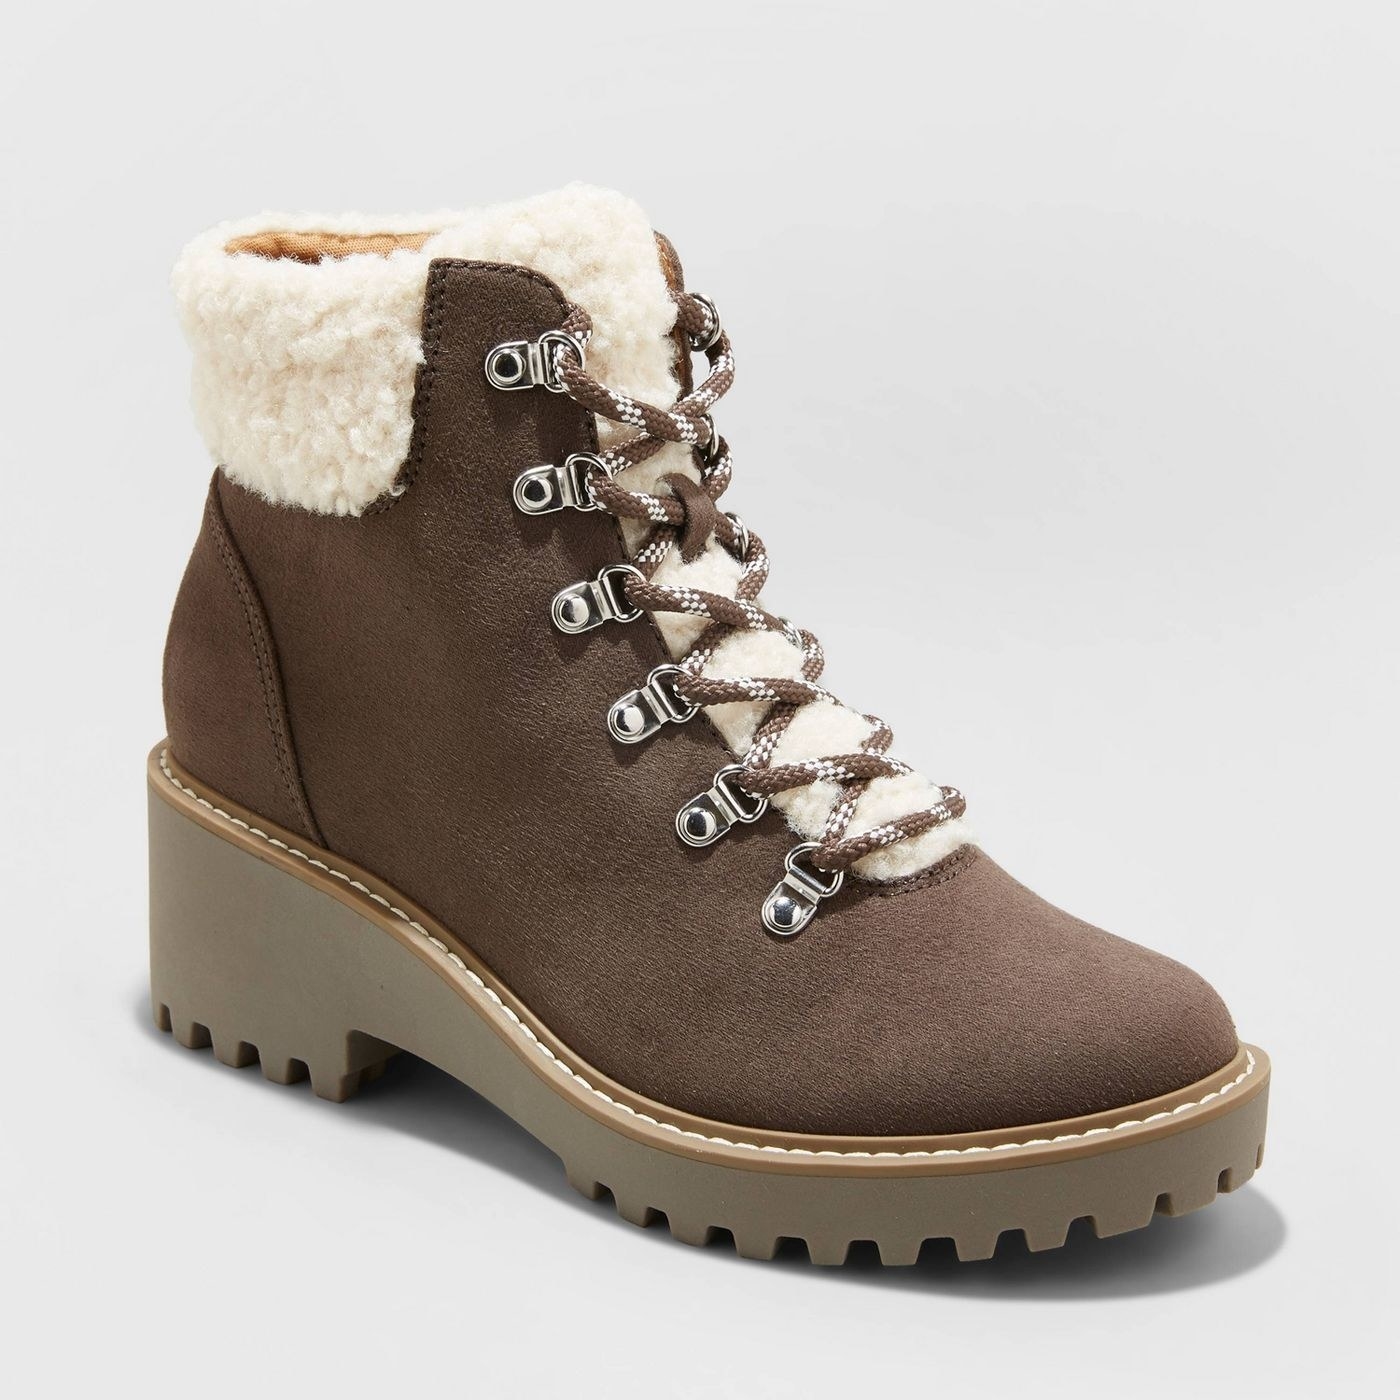 brown hiking boot with block heel and sherpa lining